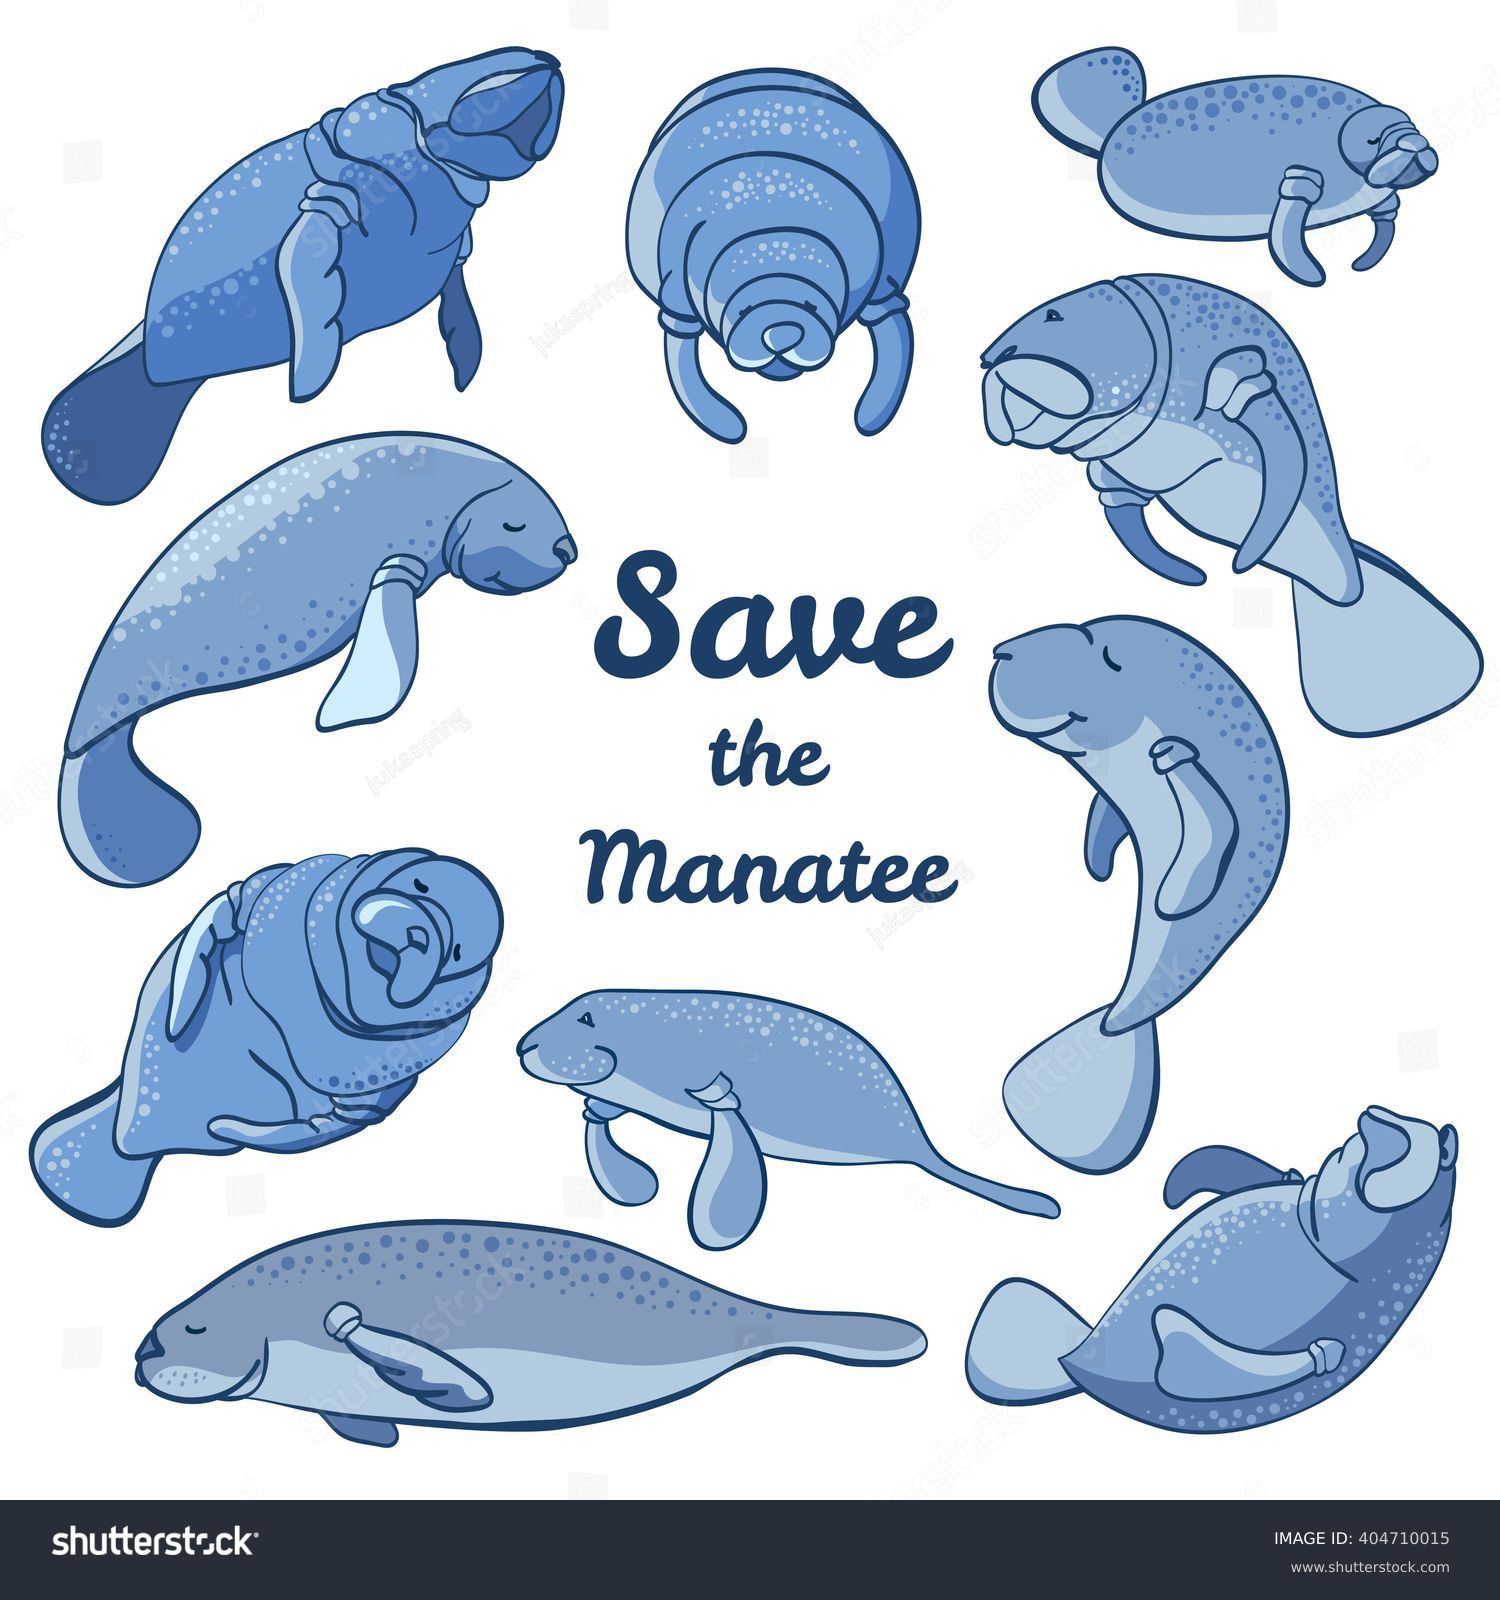 SVG of Manatees swimming in the ocean. Save the manatee concept. Character design. Vector illustrations isolated on white background. svg